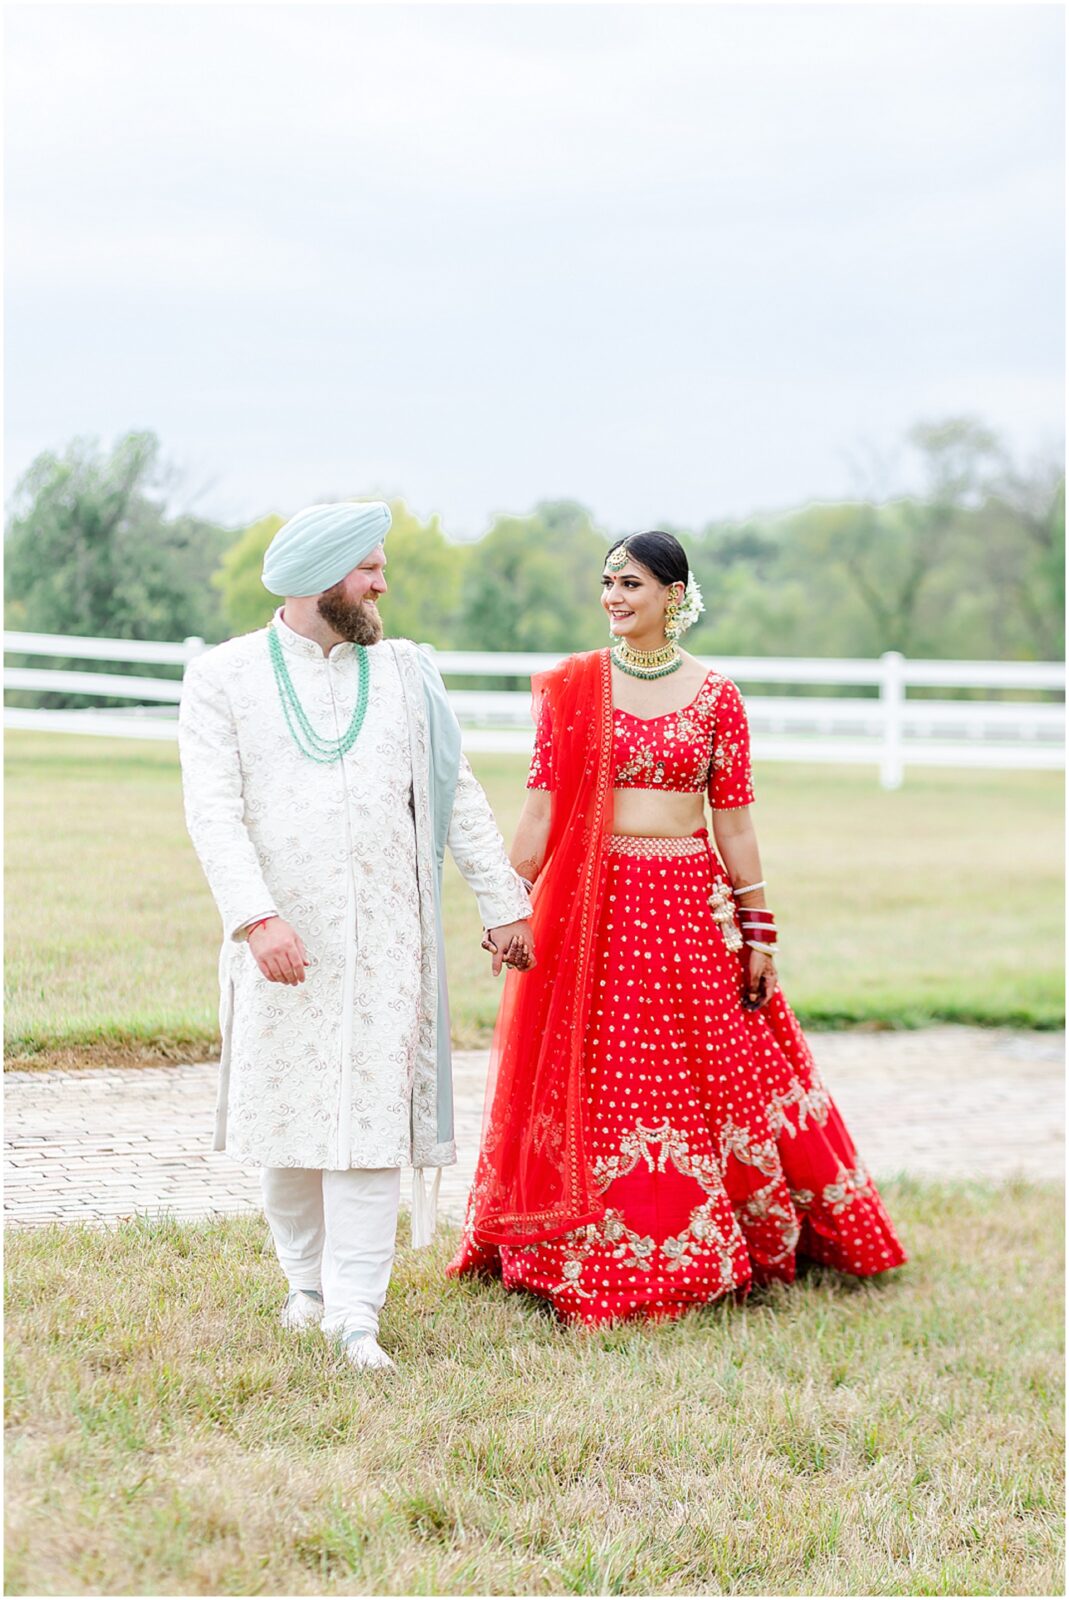 Radiant South Asian Bridal Portraits - Indian Fusion Sikh Wedding Bliss at Kansas Mildale Farms, featuring Sangeet, henna, baraat, dholi, as Seen by Mariam Saifan Photography, Your Trusted Kansas City Wedding Photographer